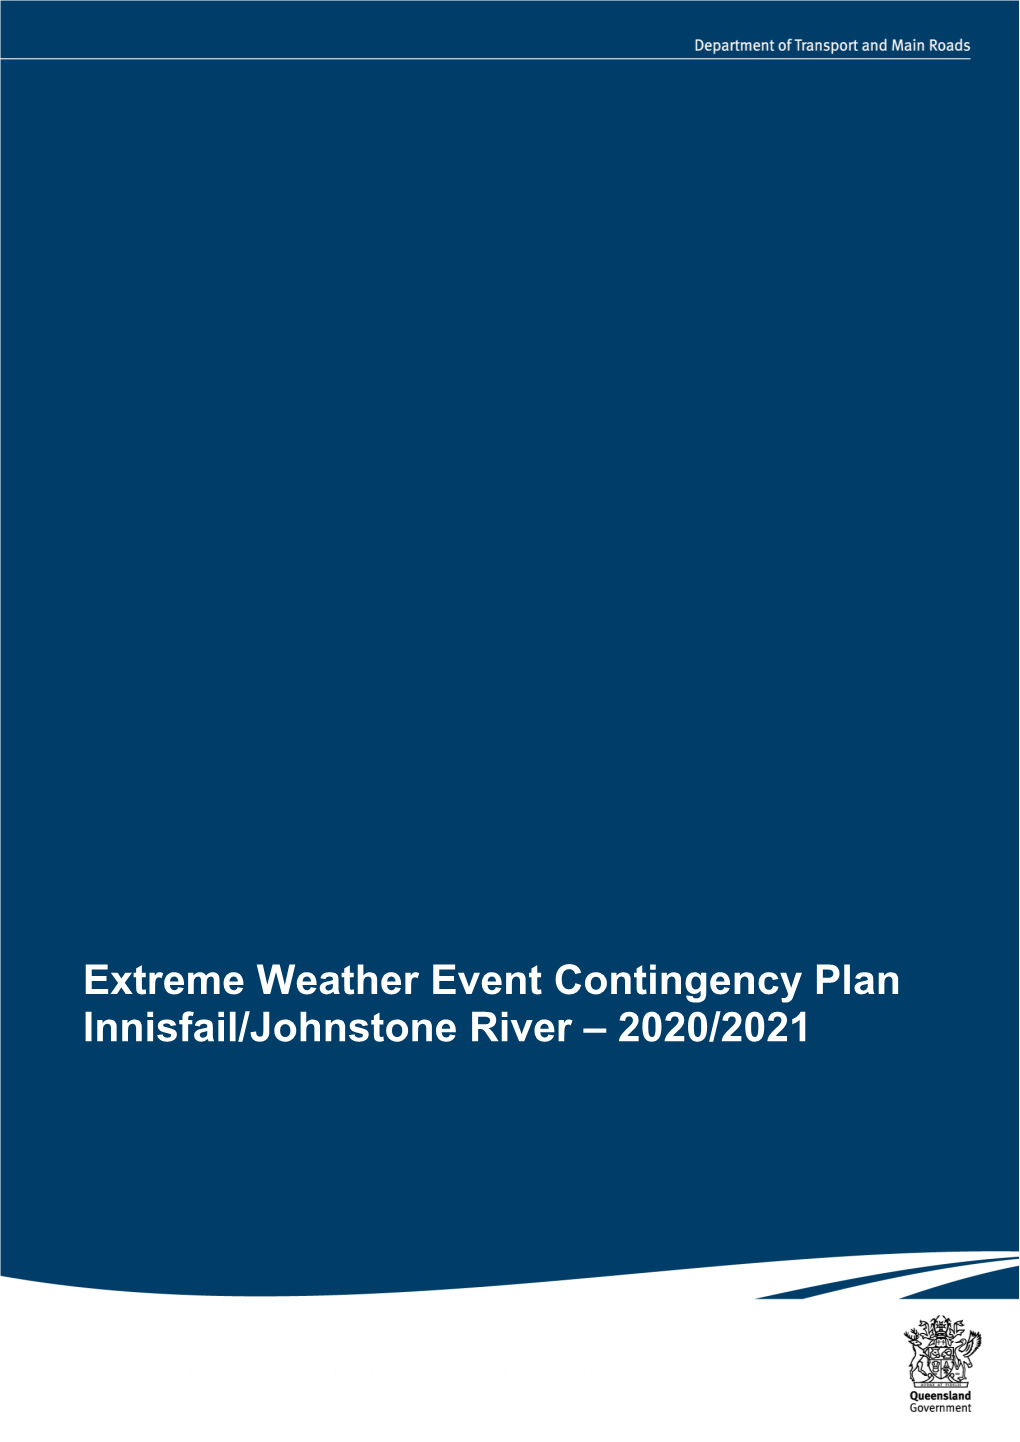 Extreme Weather Event Contingency Plan Innisfail/Johnstone River – 2020/2021